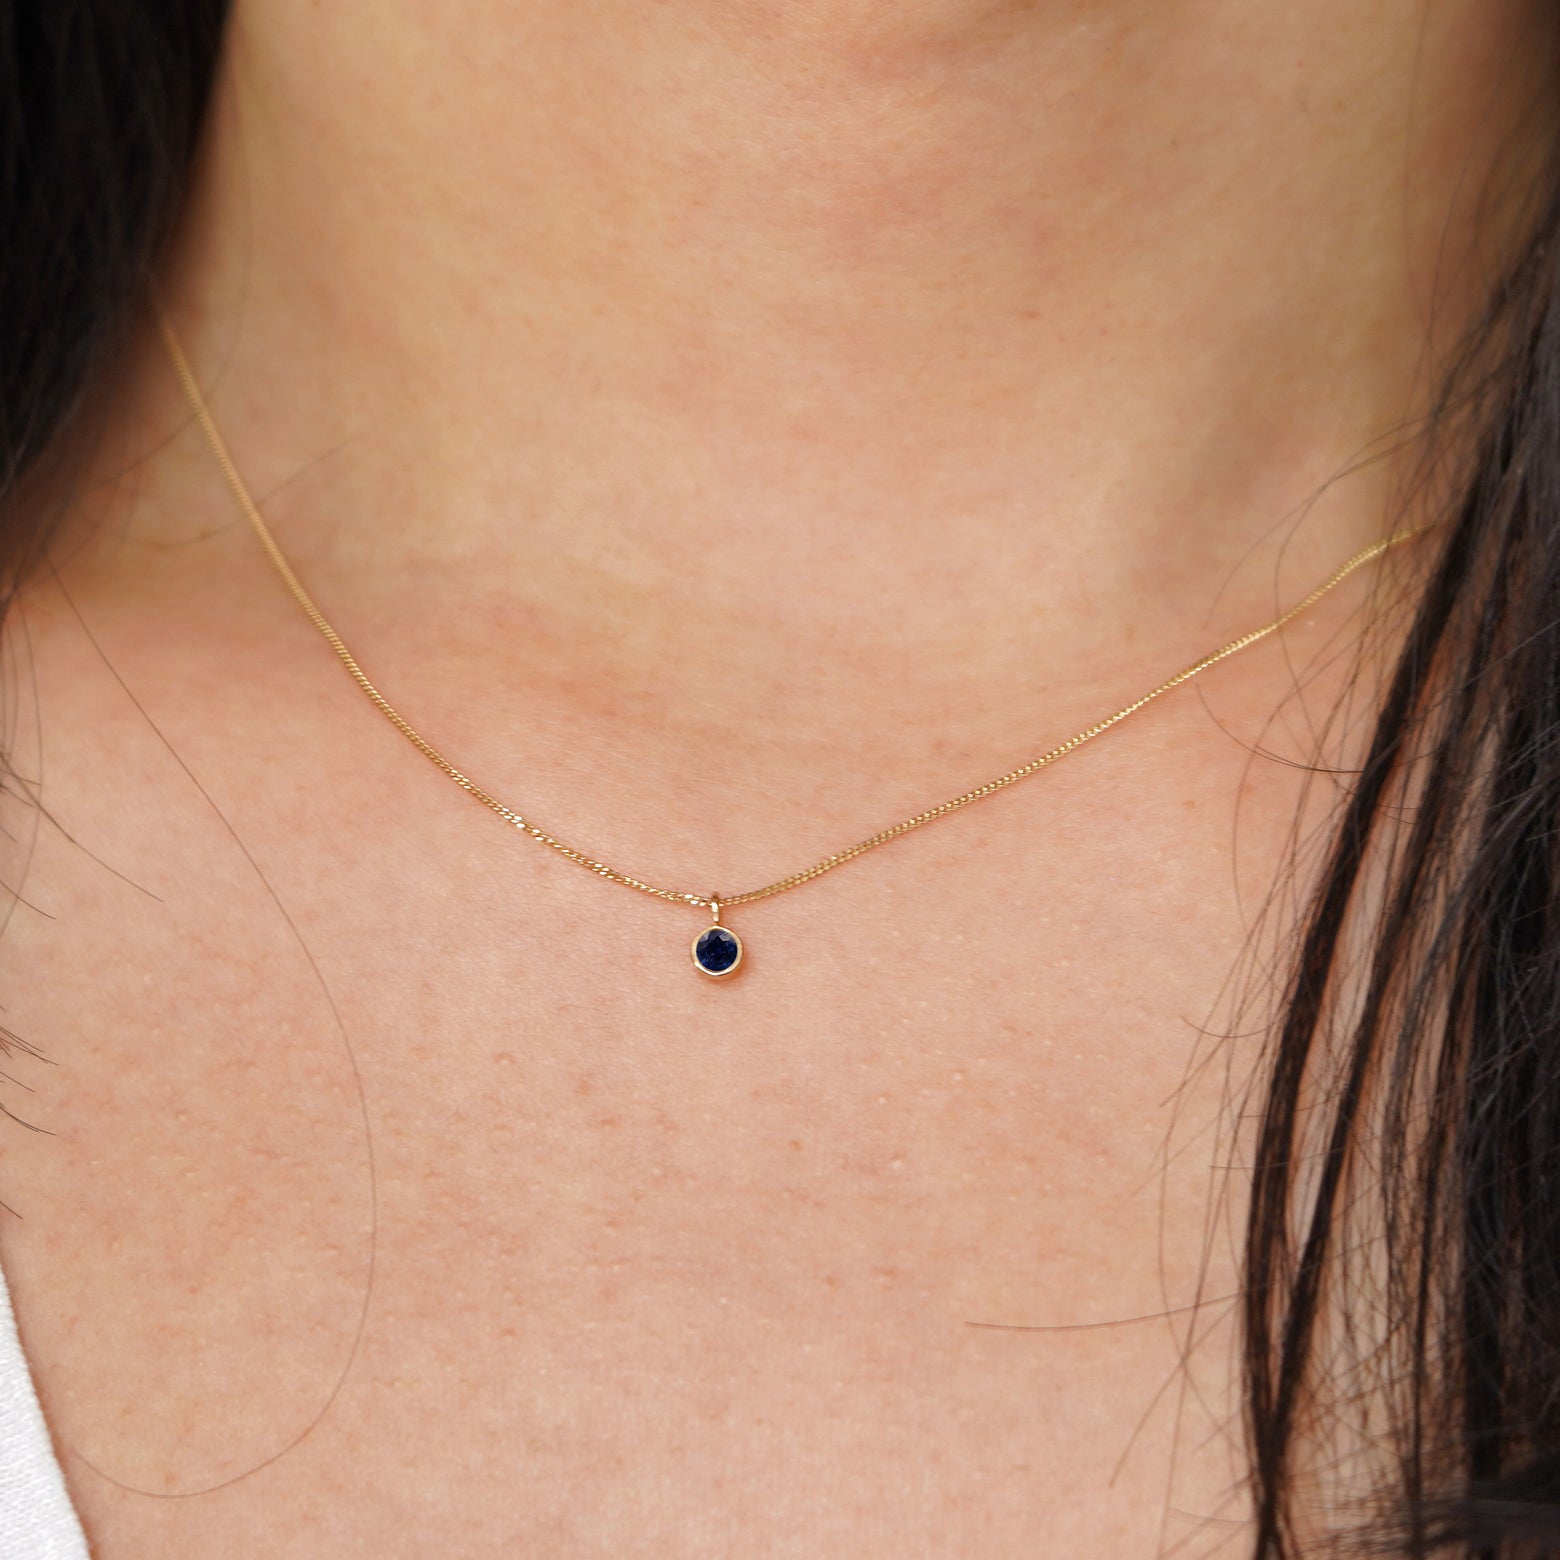 A model's neck wearing a solid 14k yellow gold Sapphire necklace